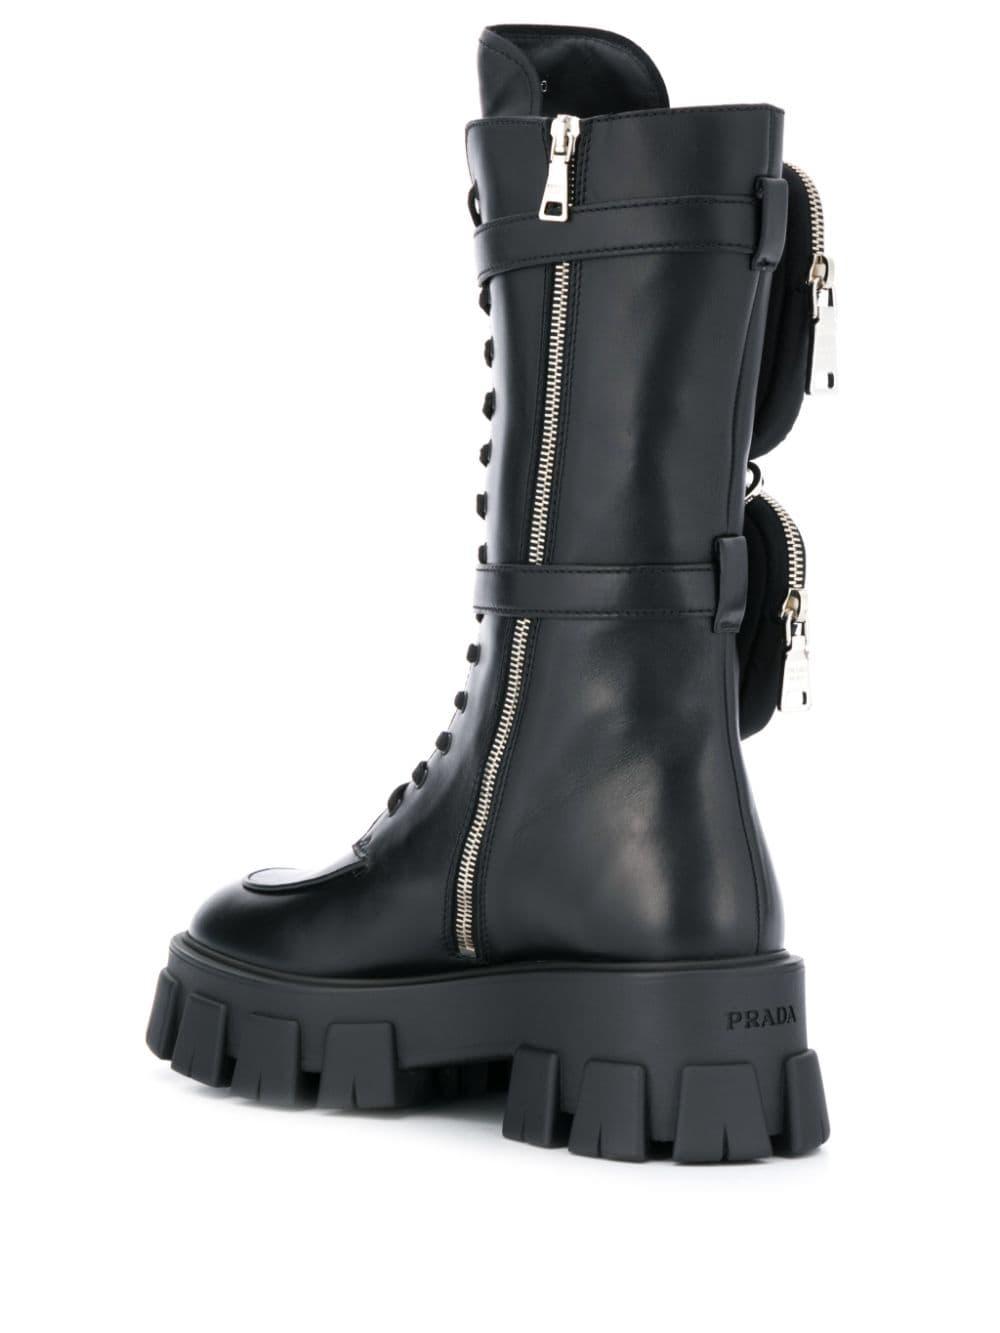 Prada Leather Monolith Chunky Boots in Black - Lyst